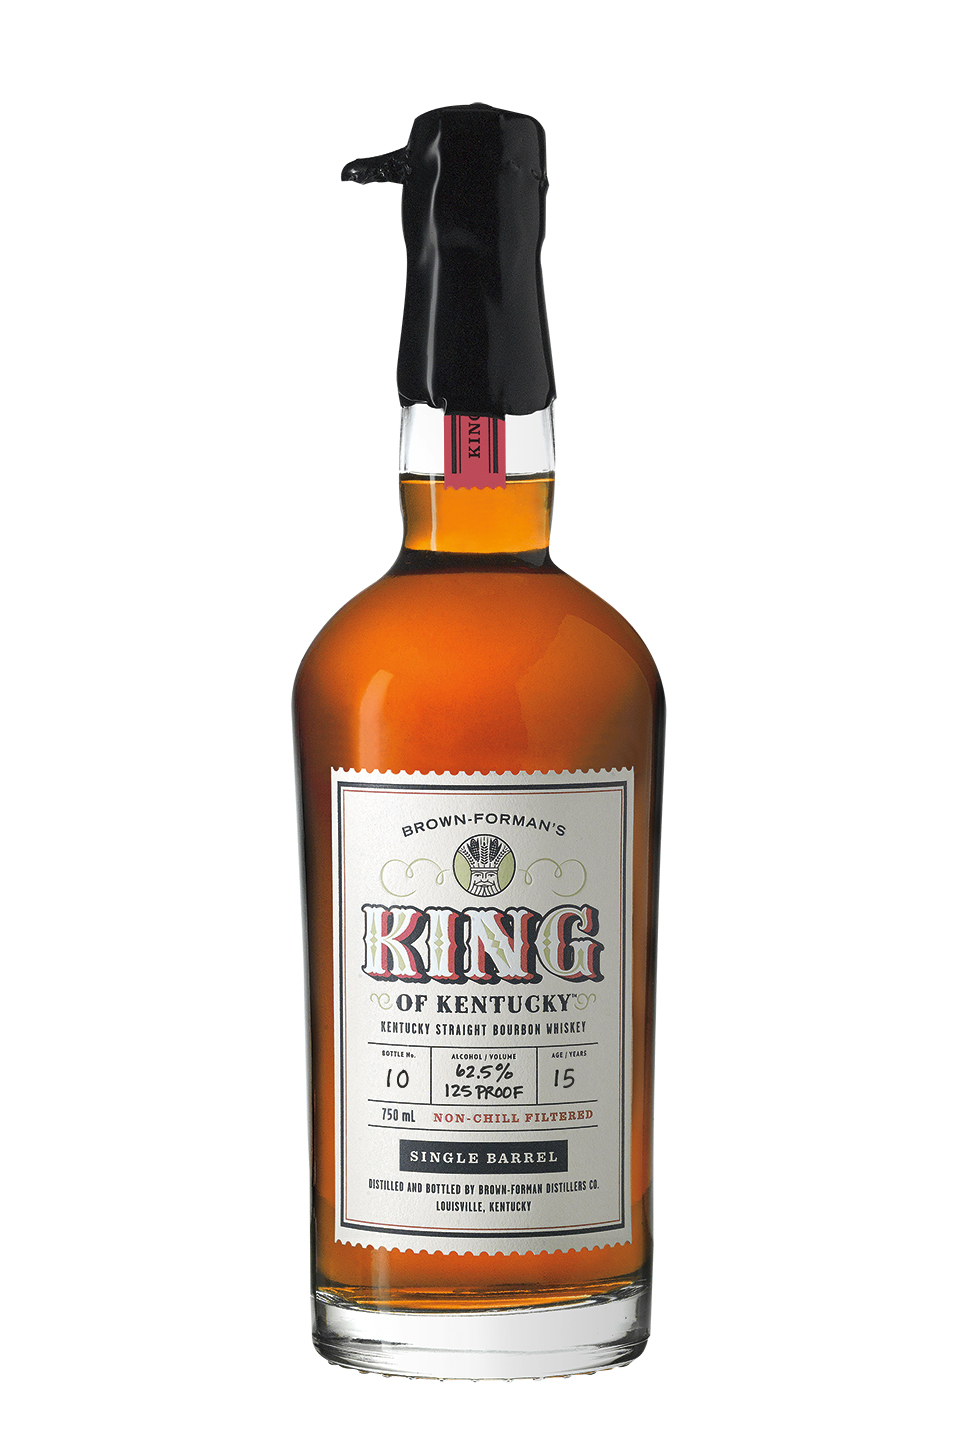 King of Kentucky, a Brown-Forman product, wins 2019 Whiskey of the Year competition